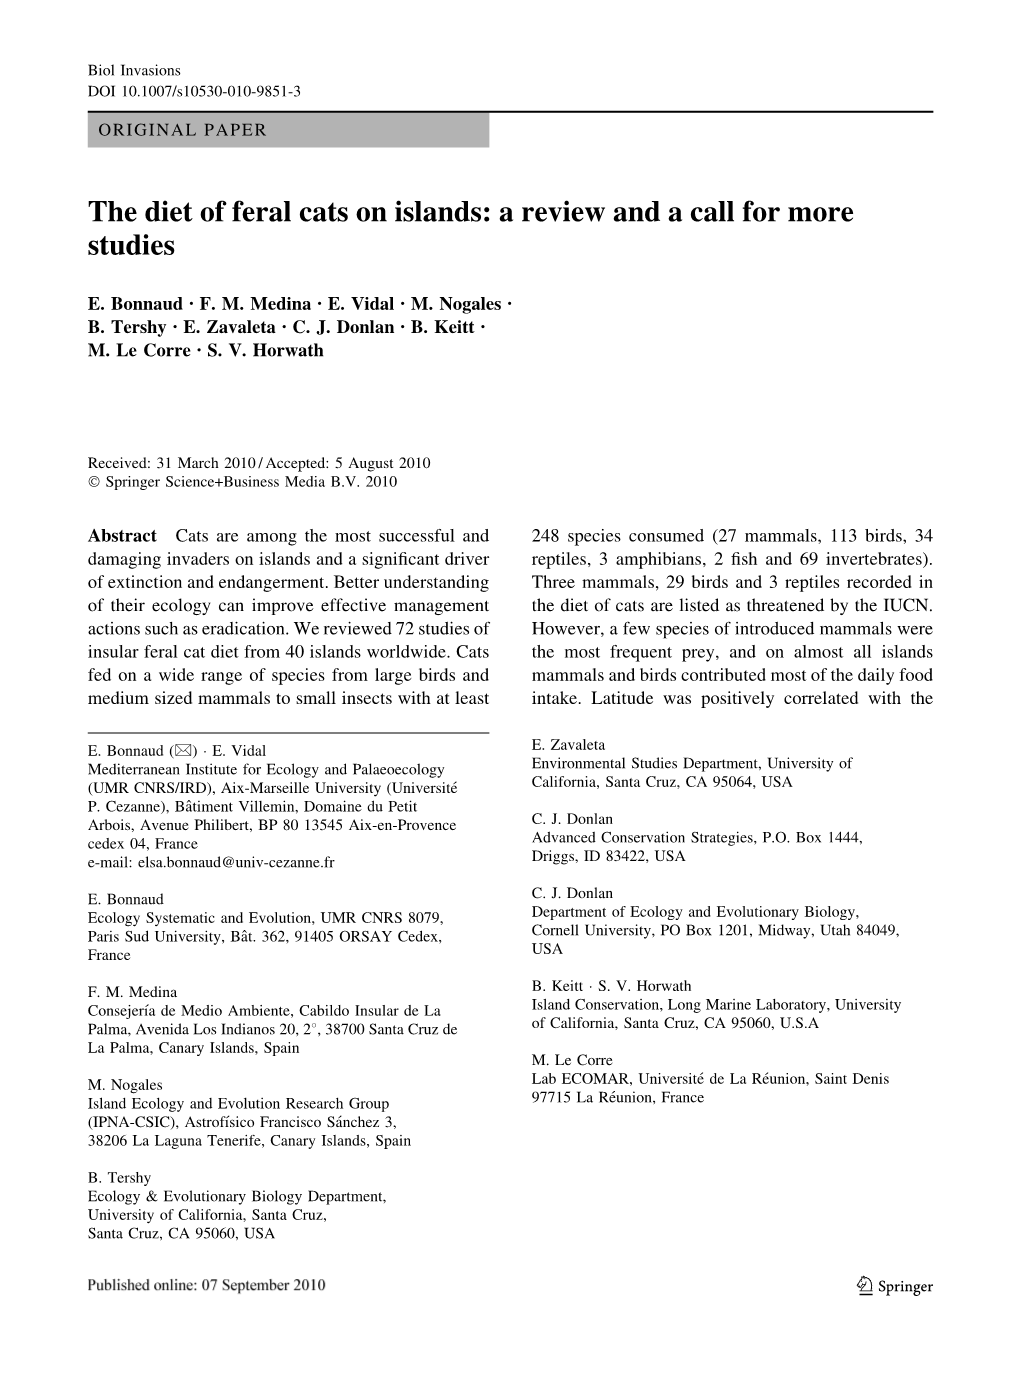 The Diet of Feral Cats on Islands: a Review and a Call for More Studies